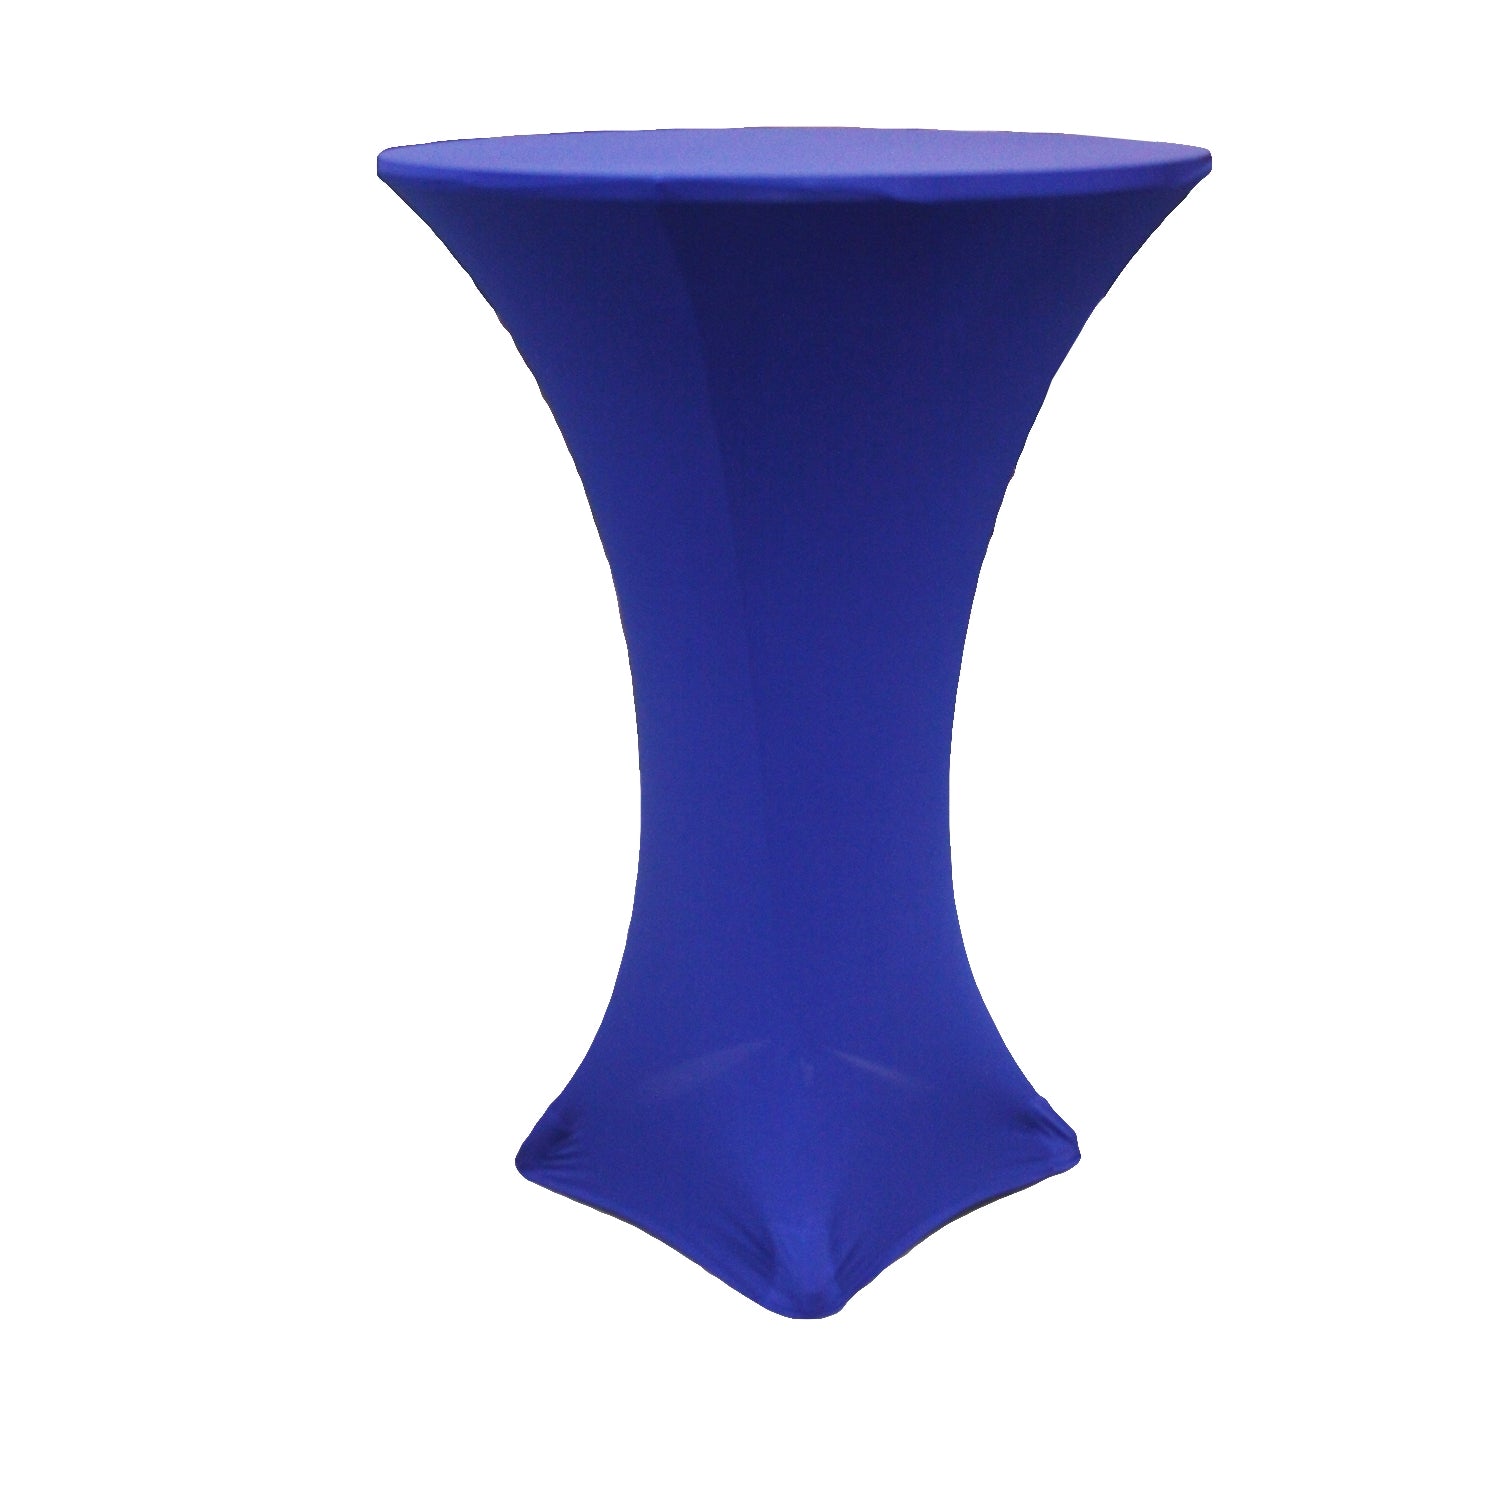 Spandex Cocktail Table Cover 30" Round - Royal Blue - CV Linens